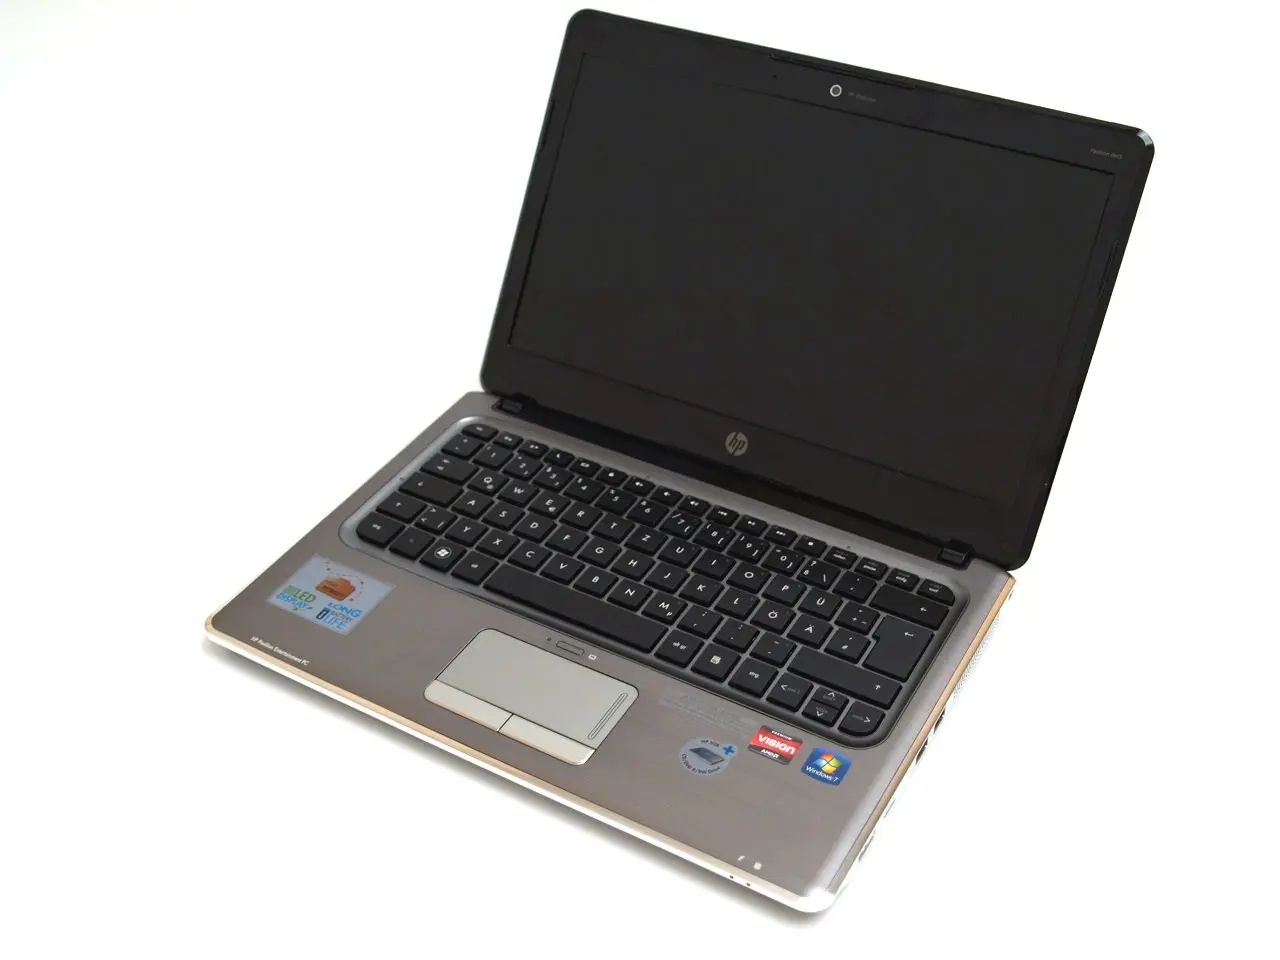 hewlett-packard hp pavilion dm3 notebook pc - What is the spec of HP Pavilion dm3